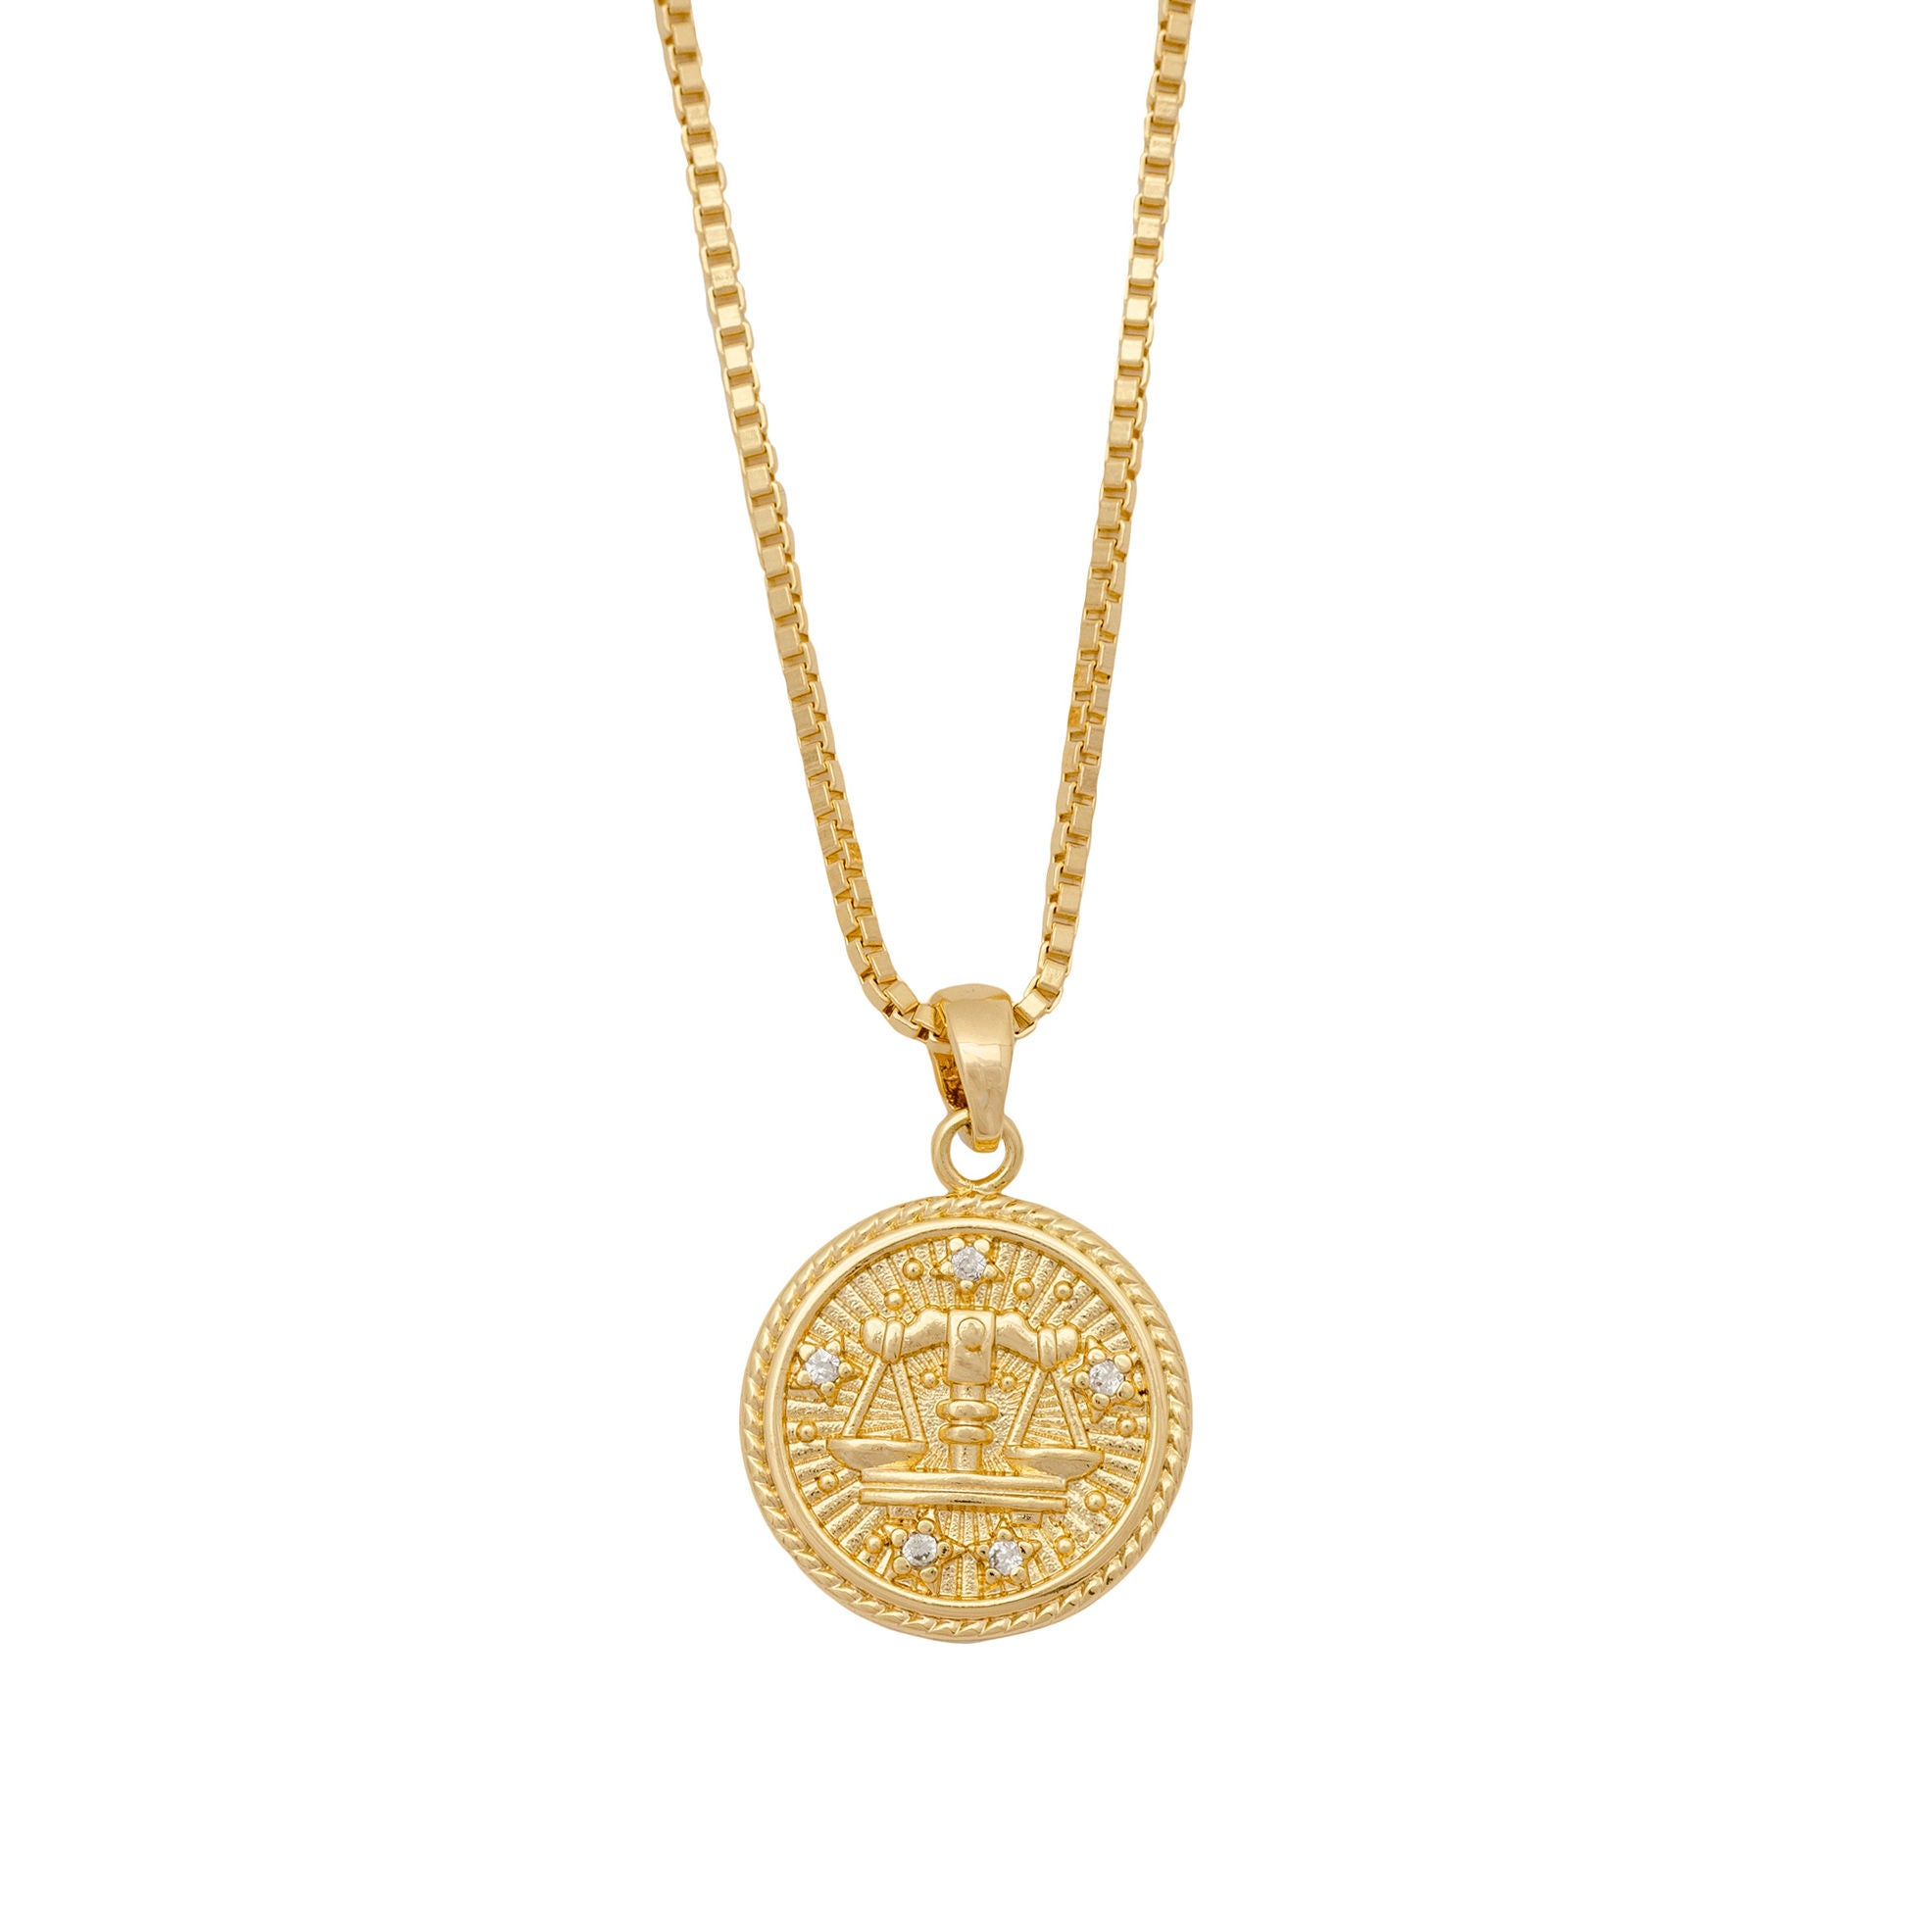 In the Stars Zodiac Necklace - Libra from Erin Fader Jewelry